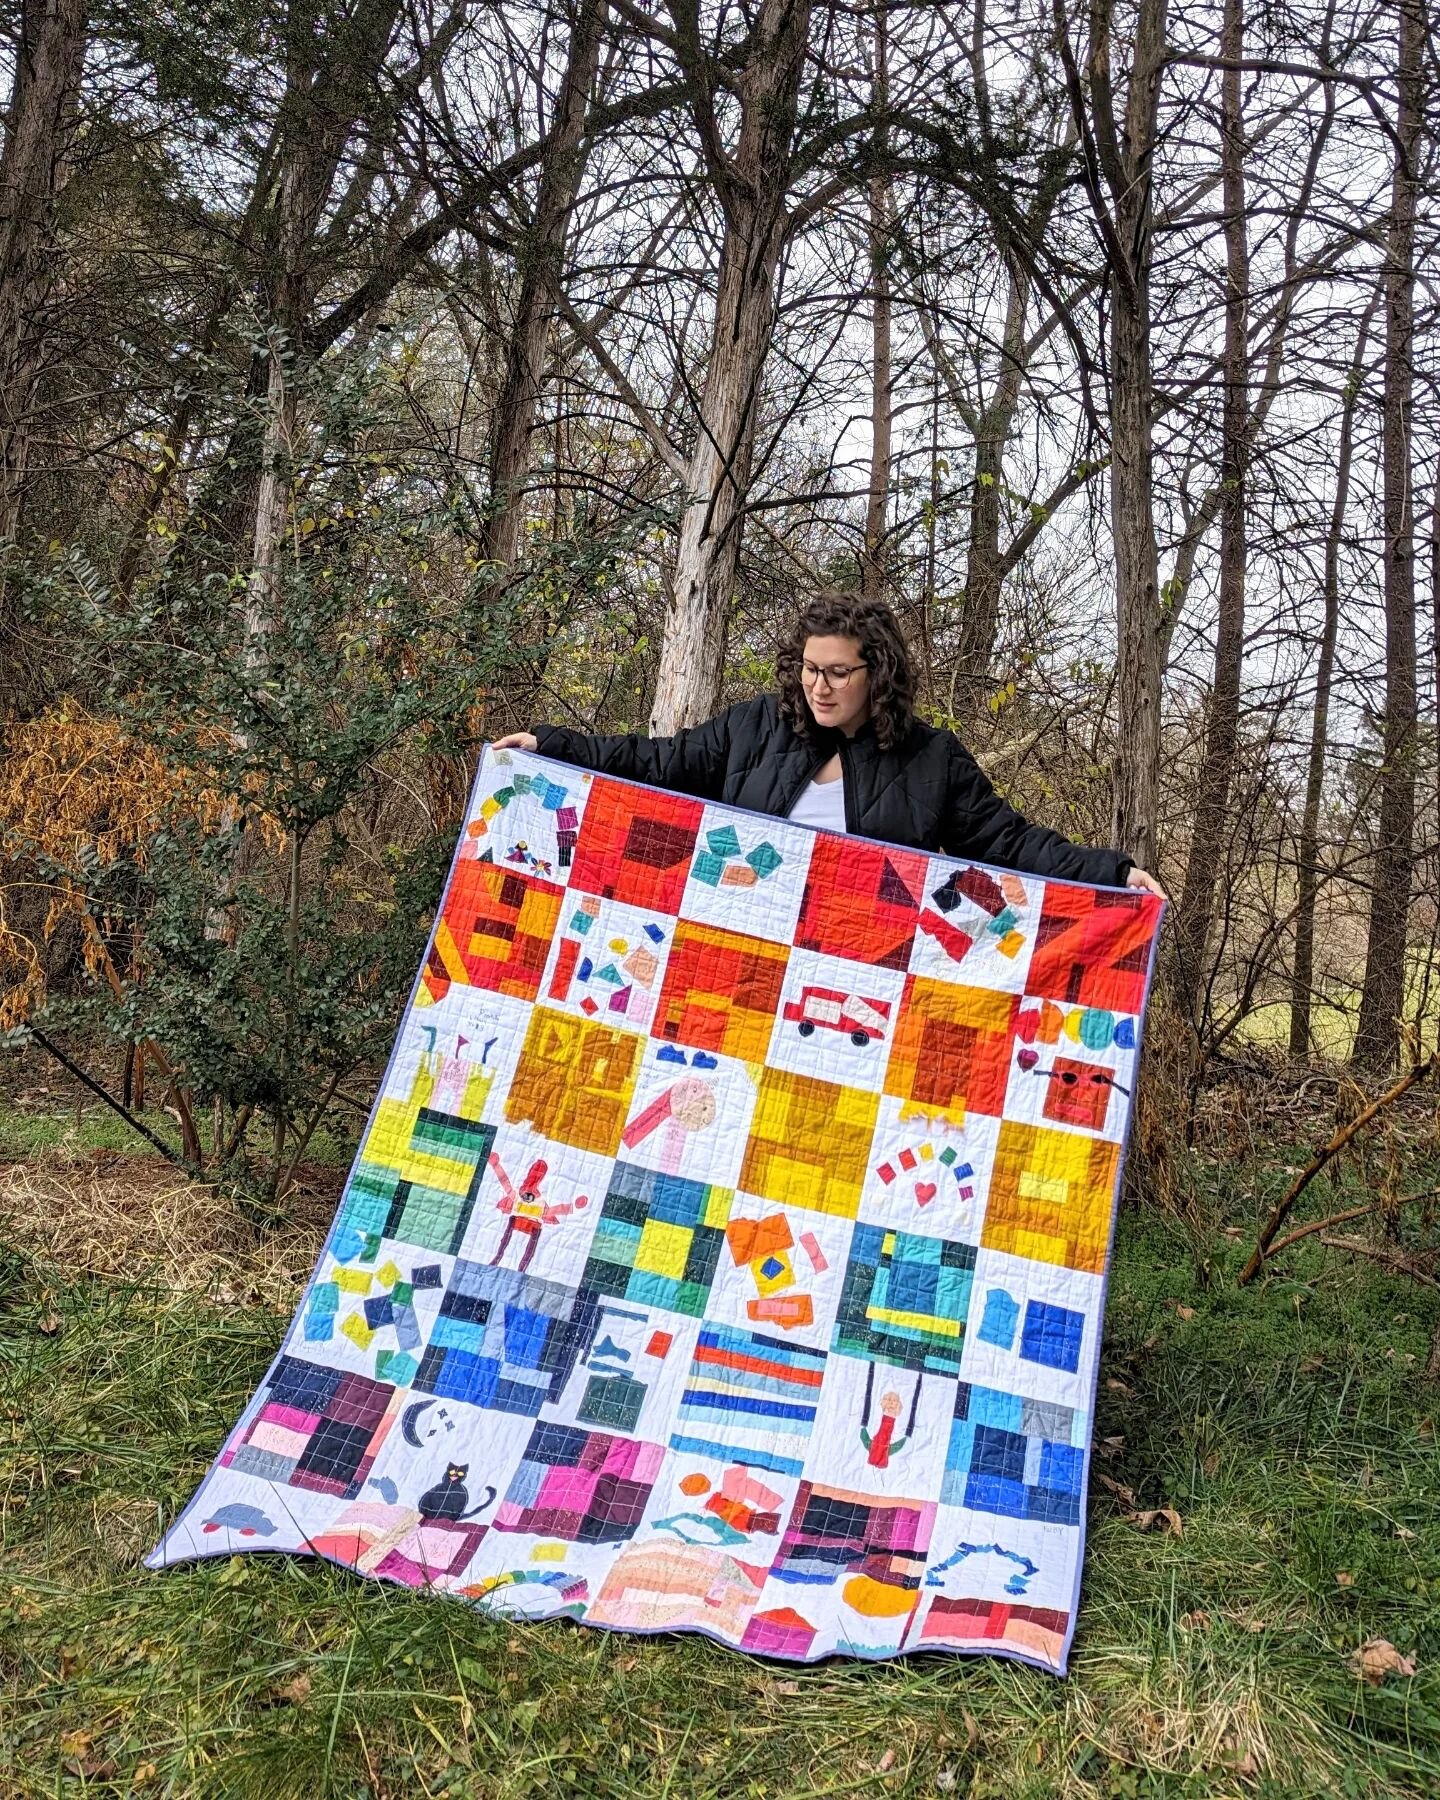 We're gearing up for baby boy to arrive in the next few weeks, so there's not been much quilting going on over here, but I wanted to finally share this full quilt to my feed! 💜

This was created using blocks made by kiddos from the pediatric therapy